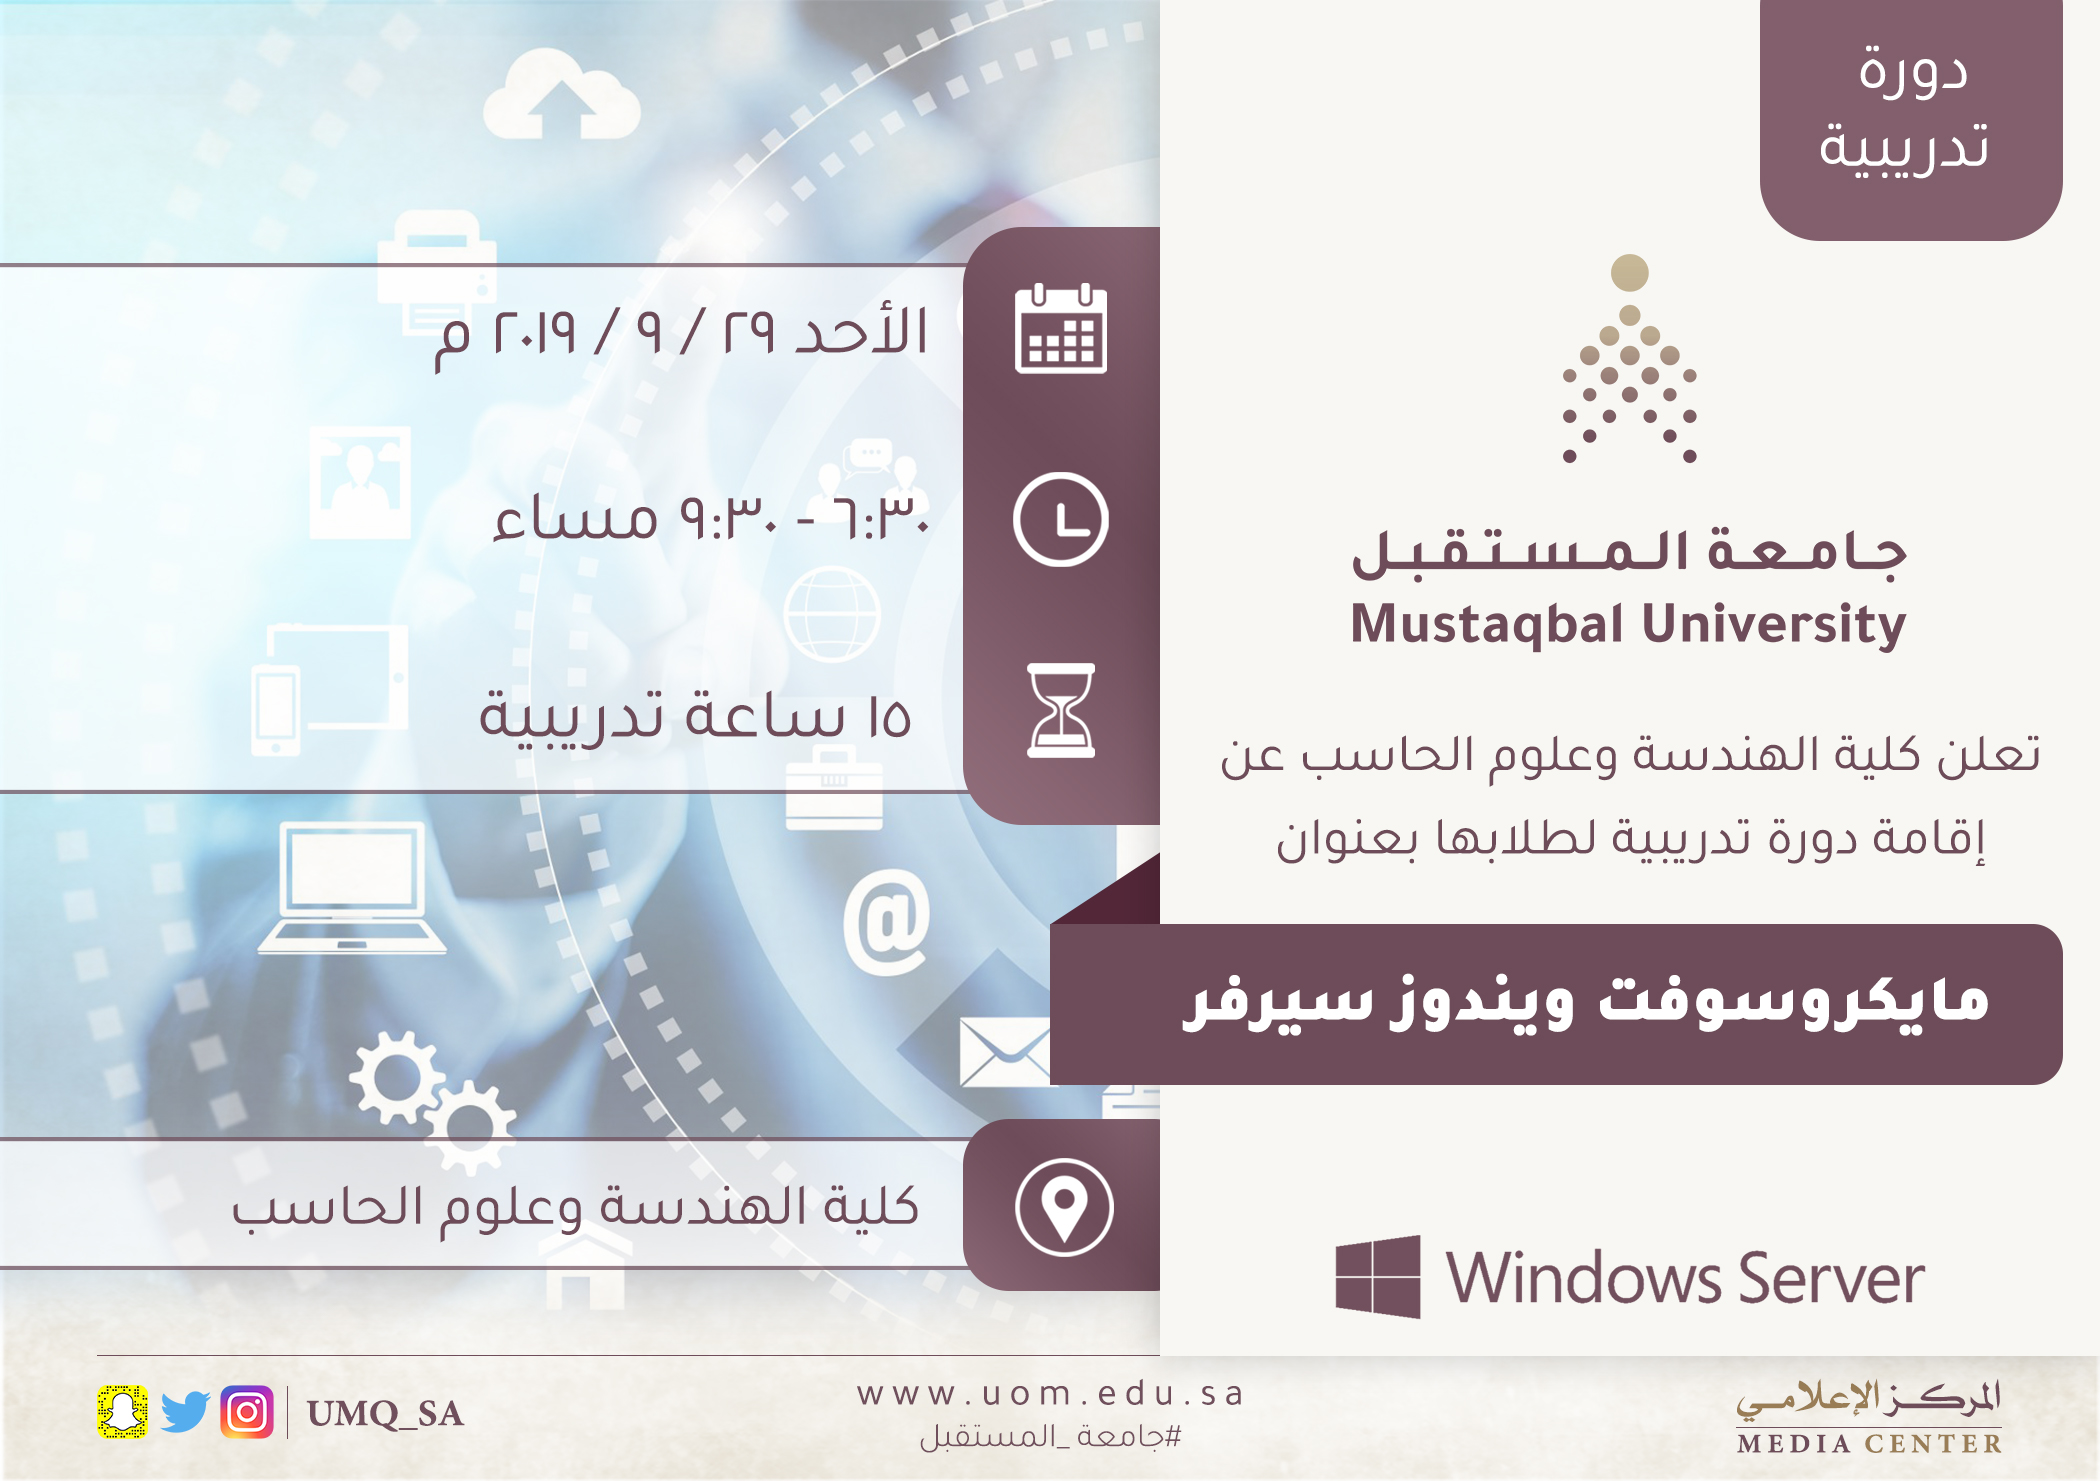 A training course for its students entitled “Microsoft Windows Server”